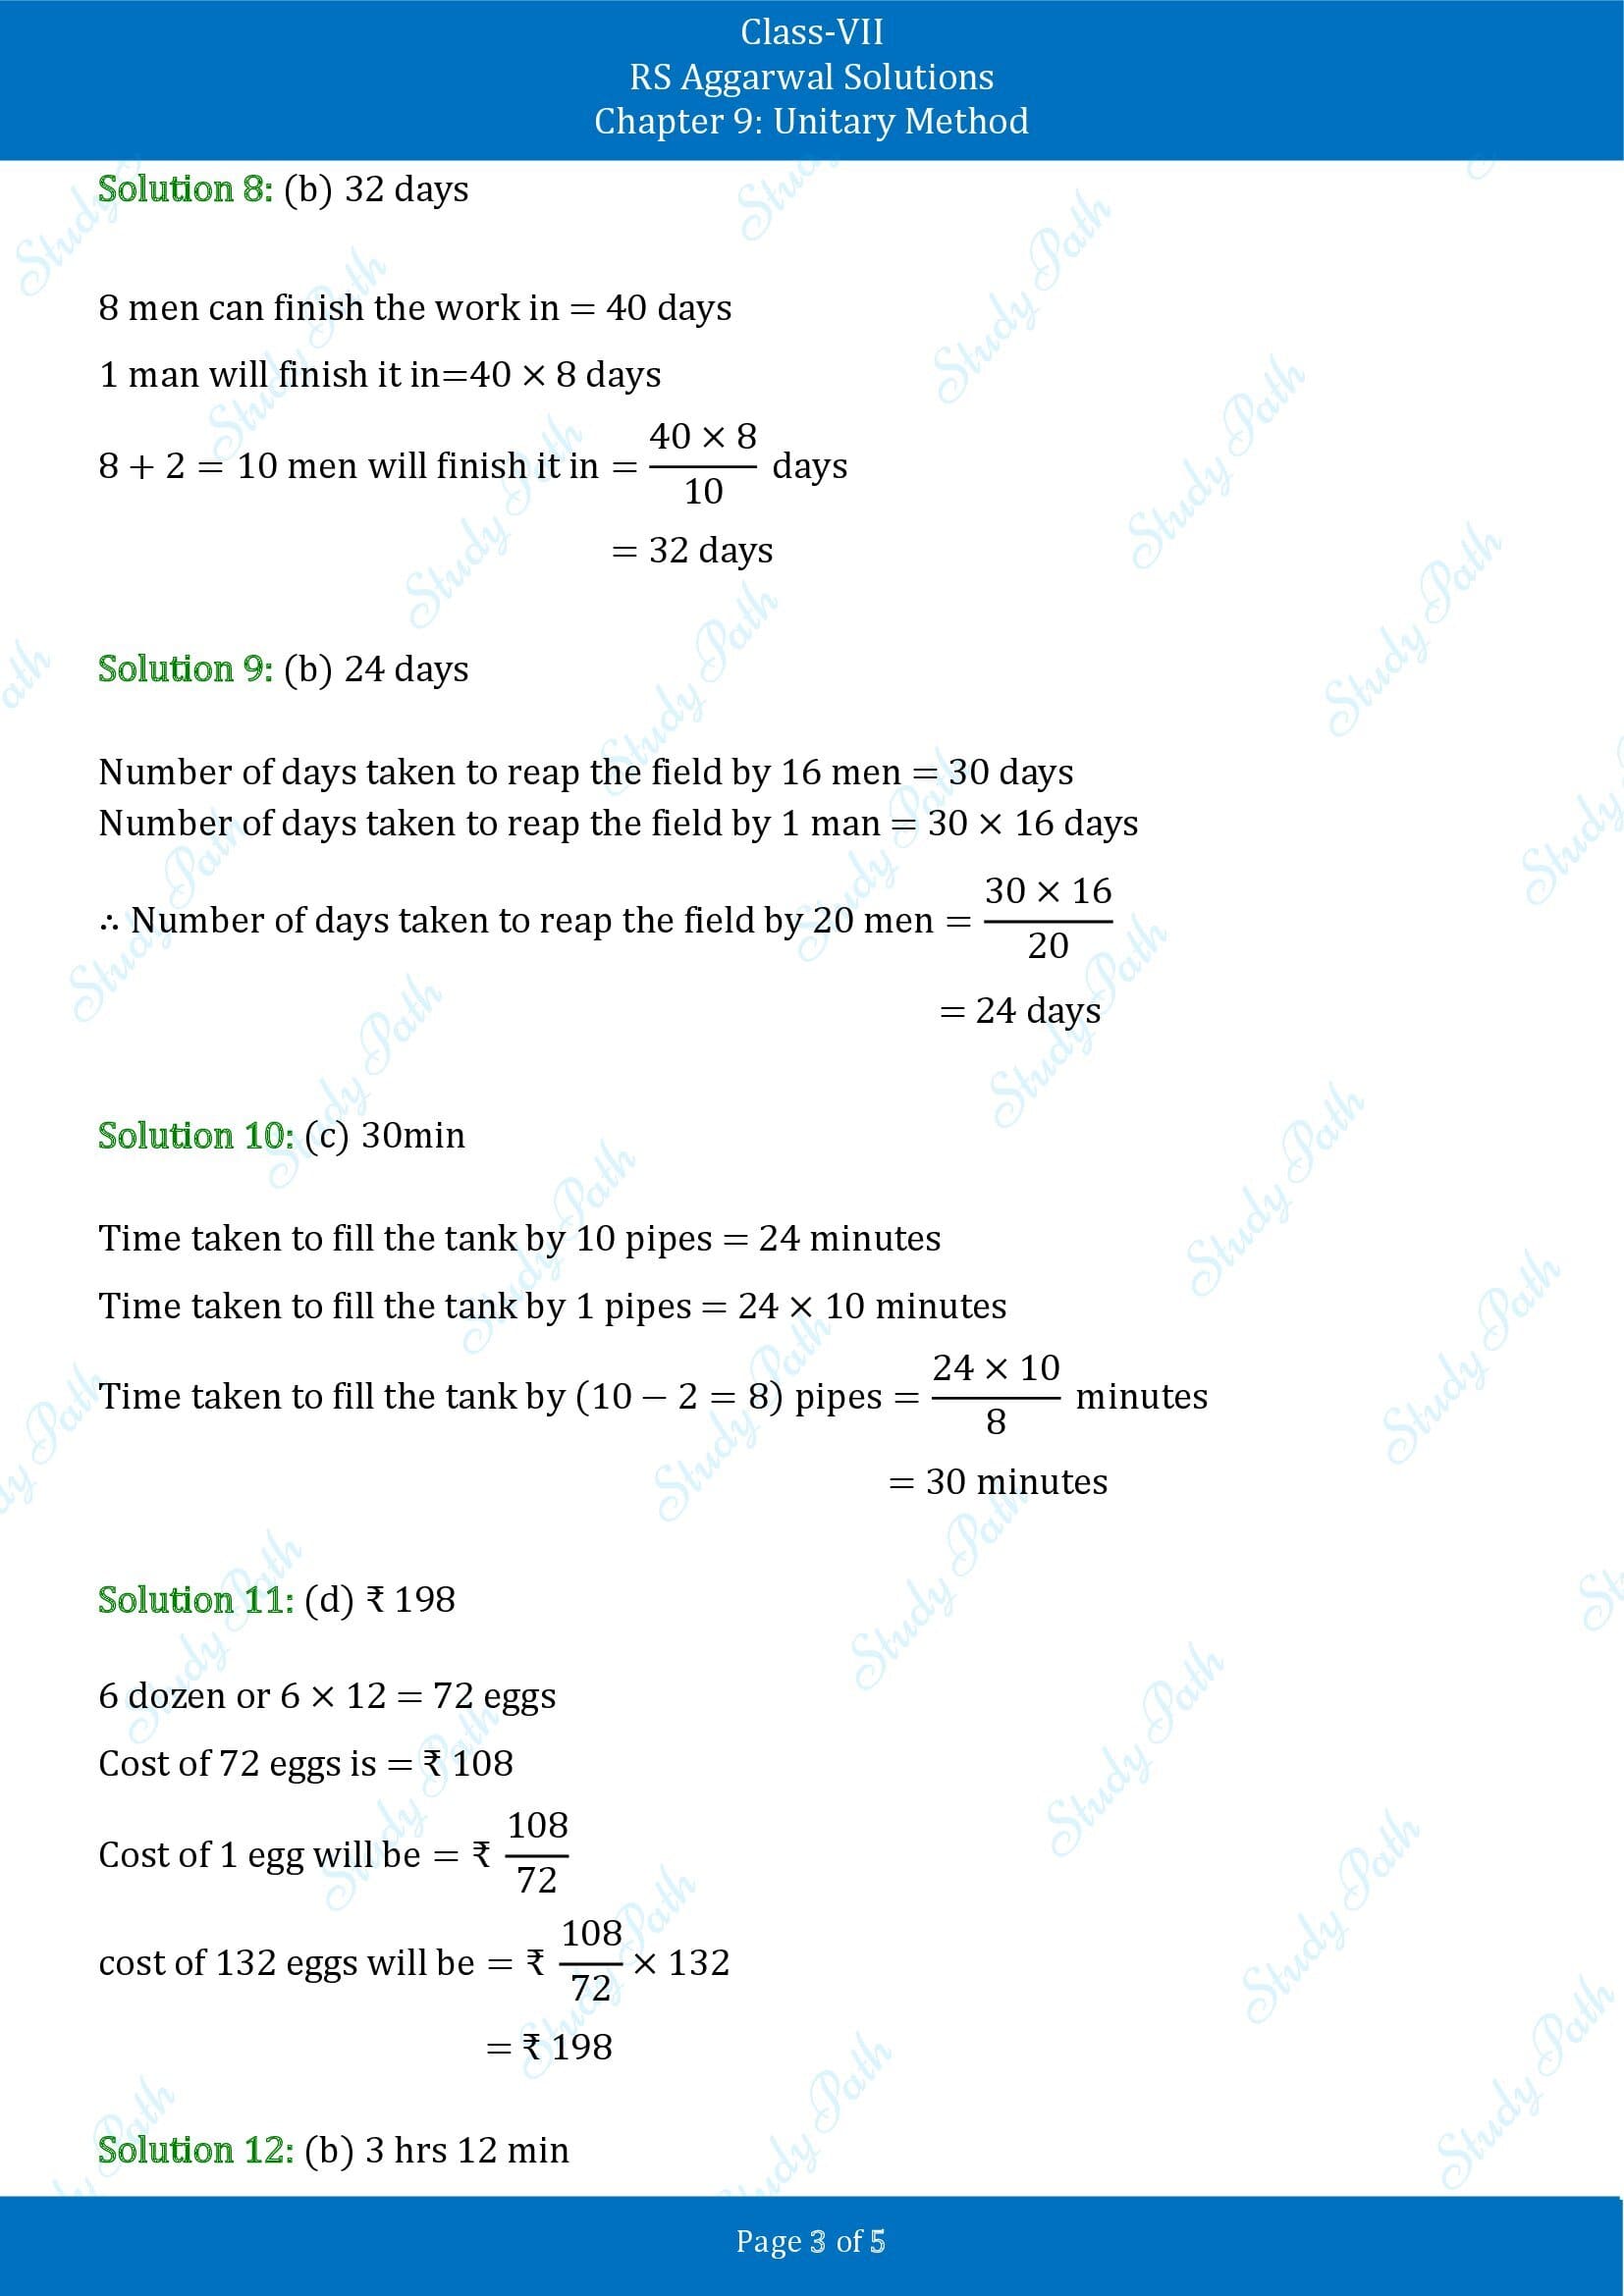 RS Aggarwal Solutions Class 7 Chapter 9 Unitary Method Exercise 9C MCQs 00003